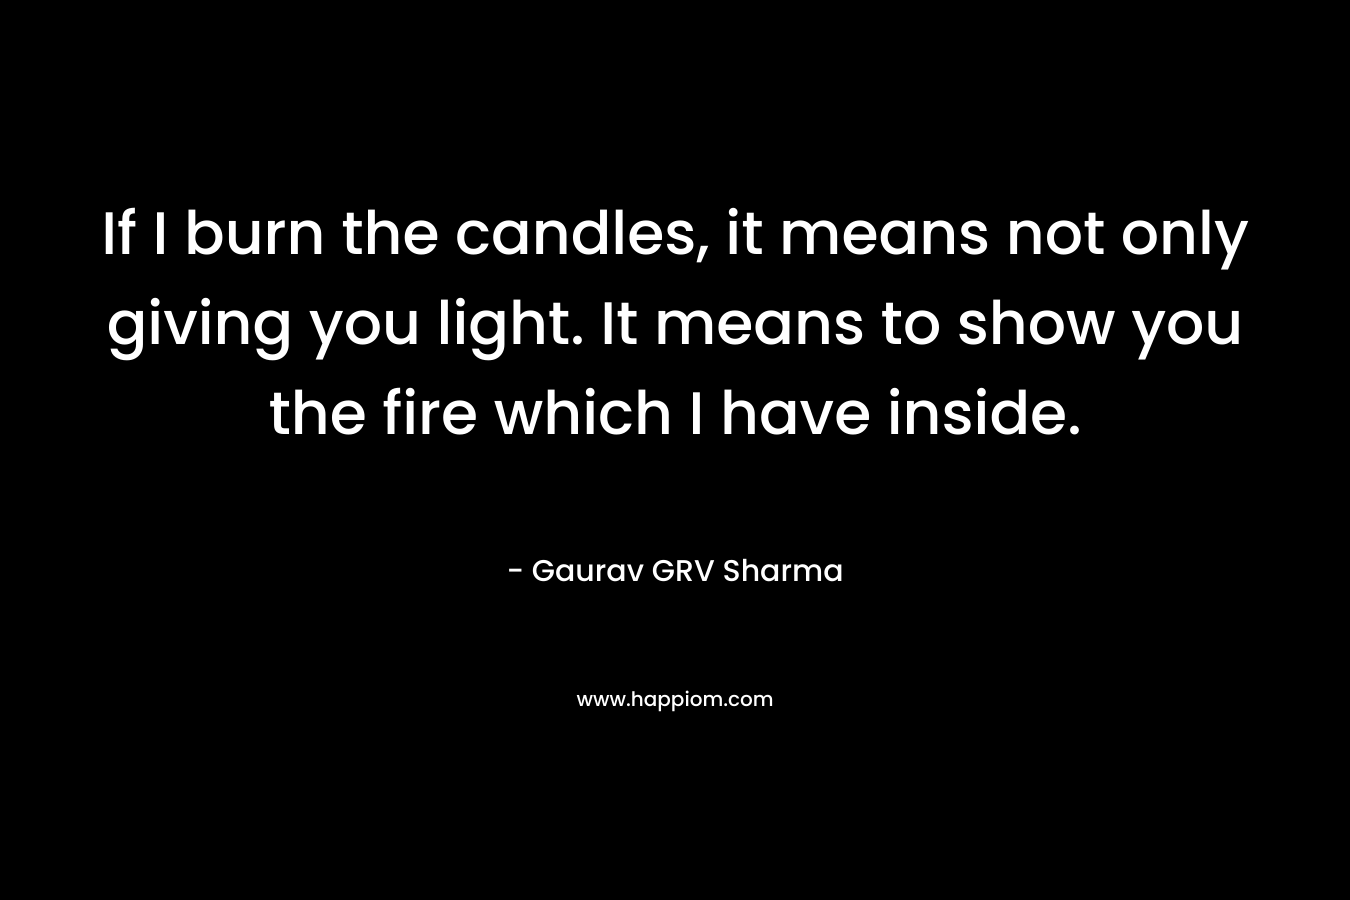 If I burn the candles, it means not only giving you light. It means to show you the fire which I have inside.